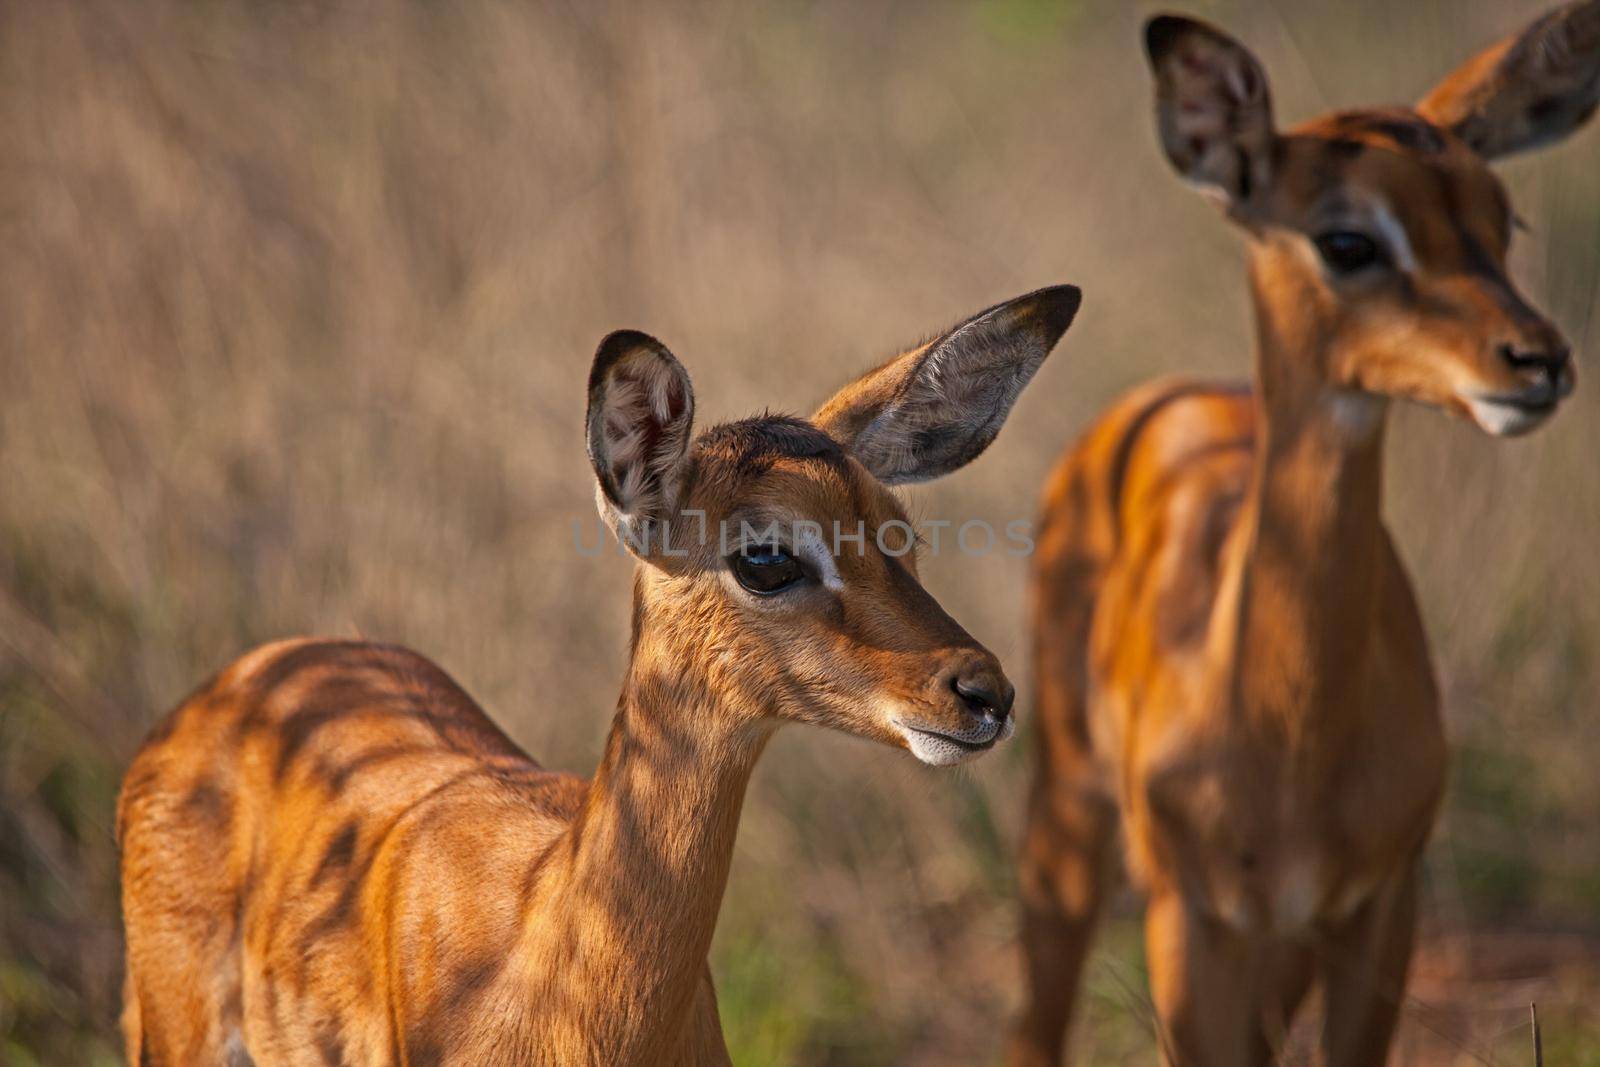 Two very young  Impala (Aepyceros melampus) lambs in Kruger National Park. South Africa